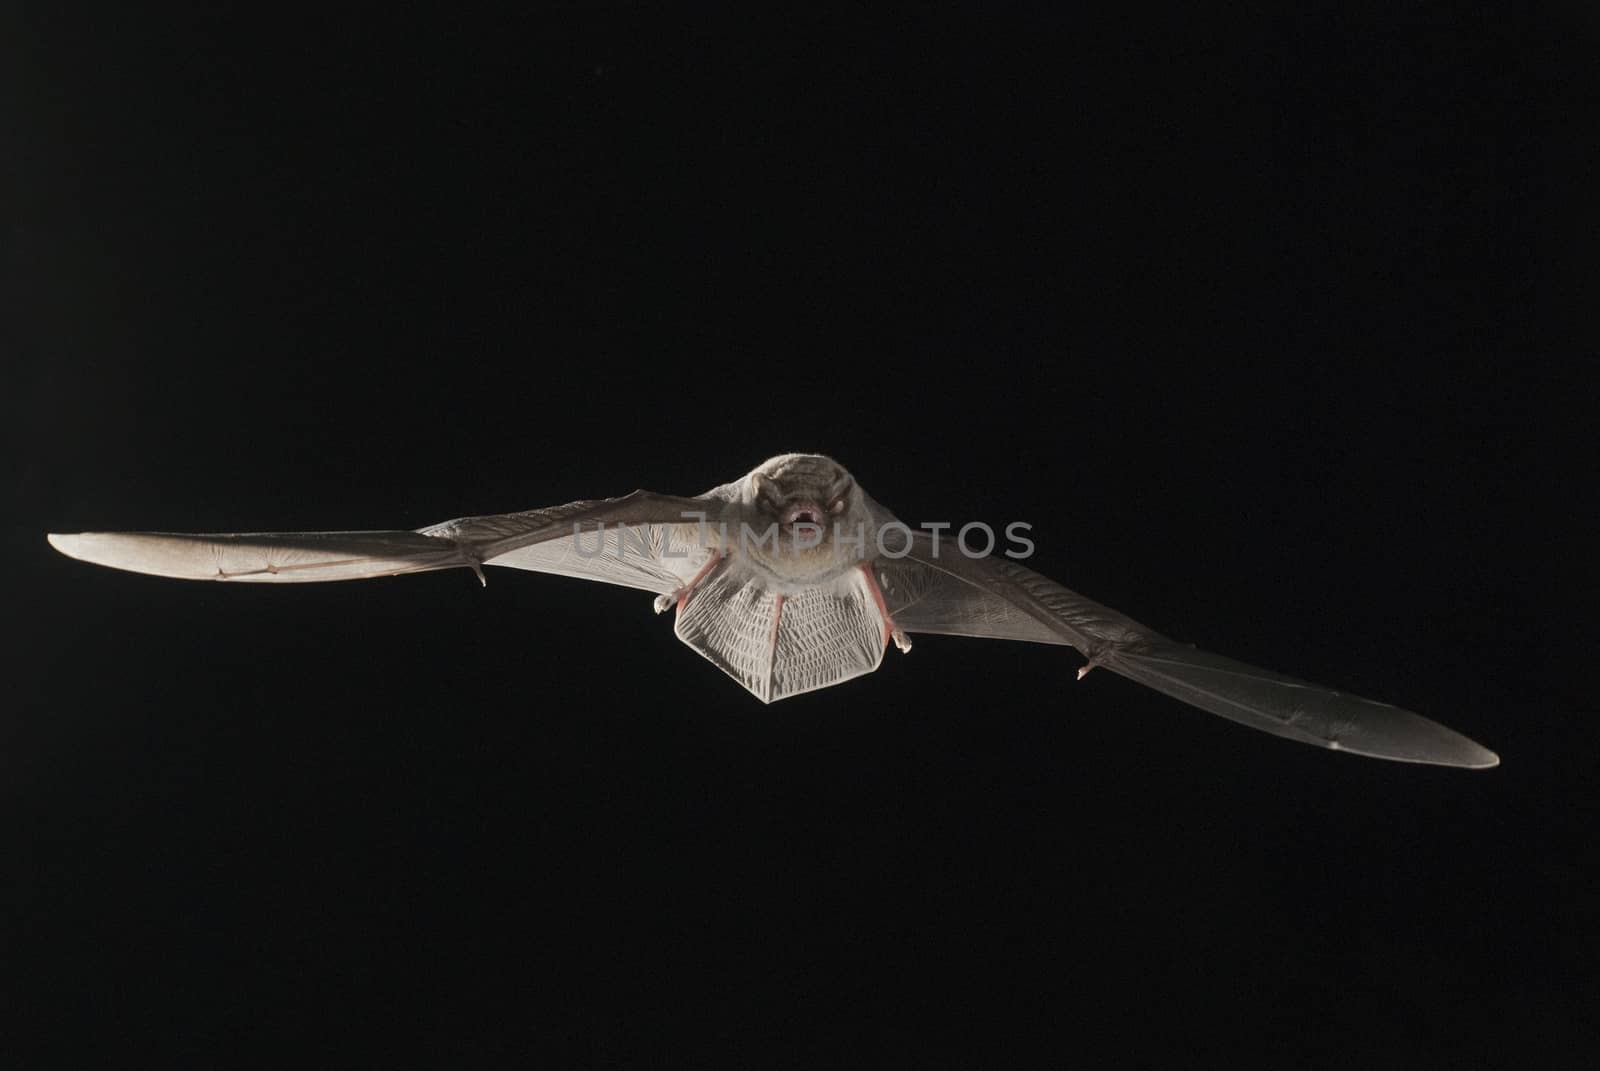 Bat bent common Miniopterus schreibersii, flying in a cave, with by jalonsohu@gmail.com